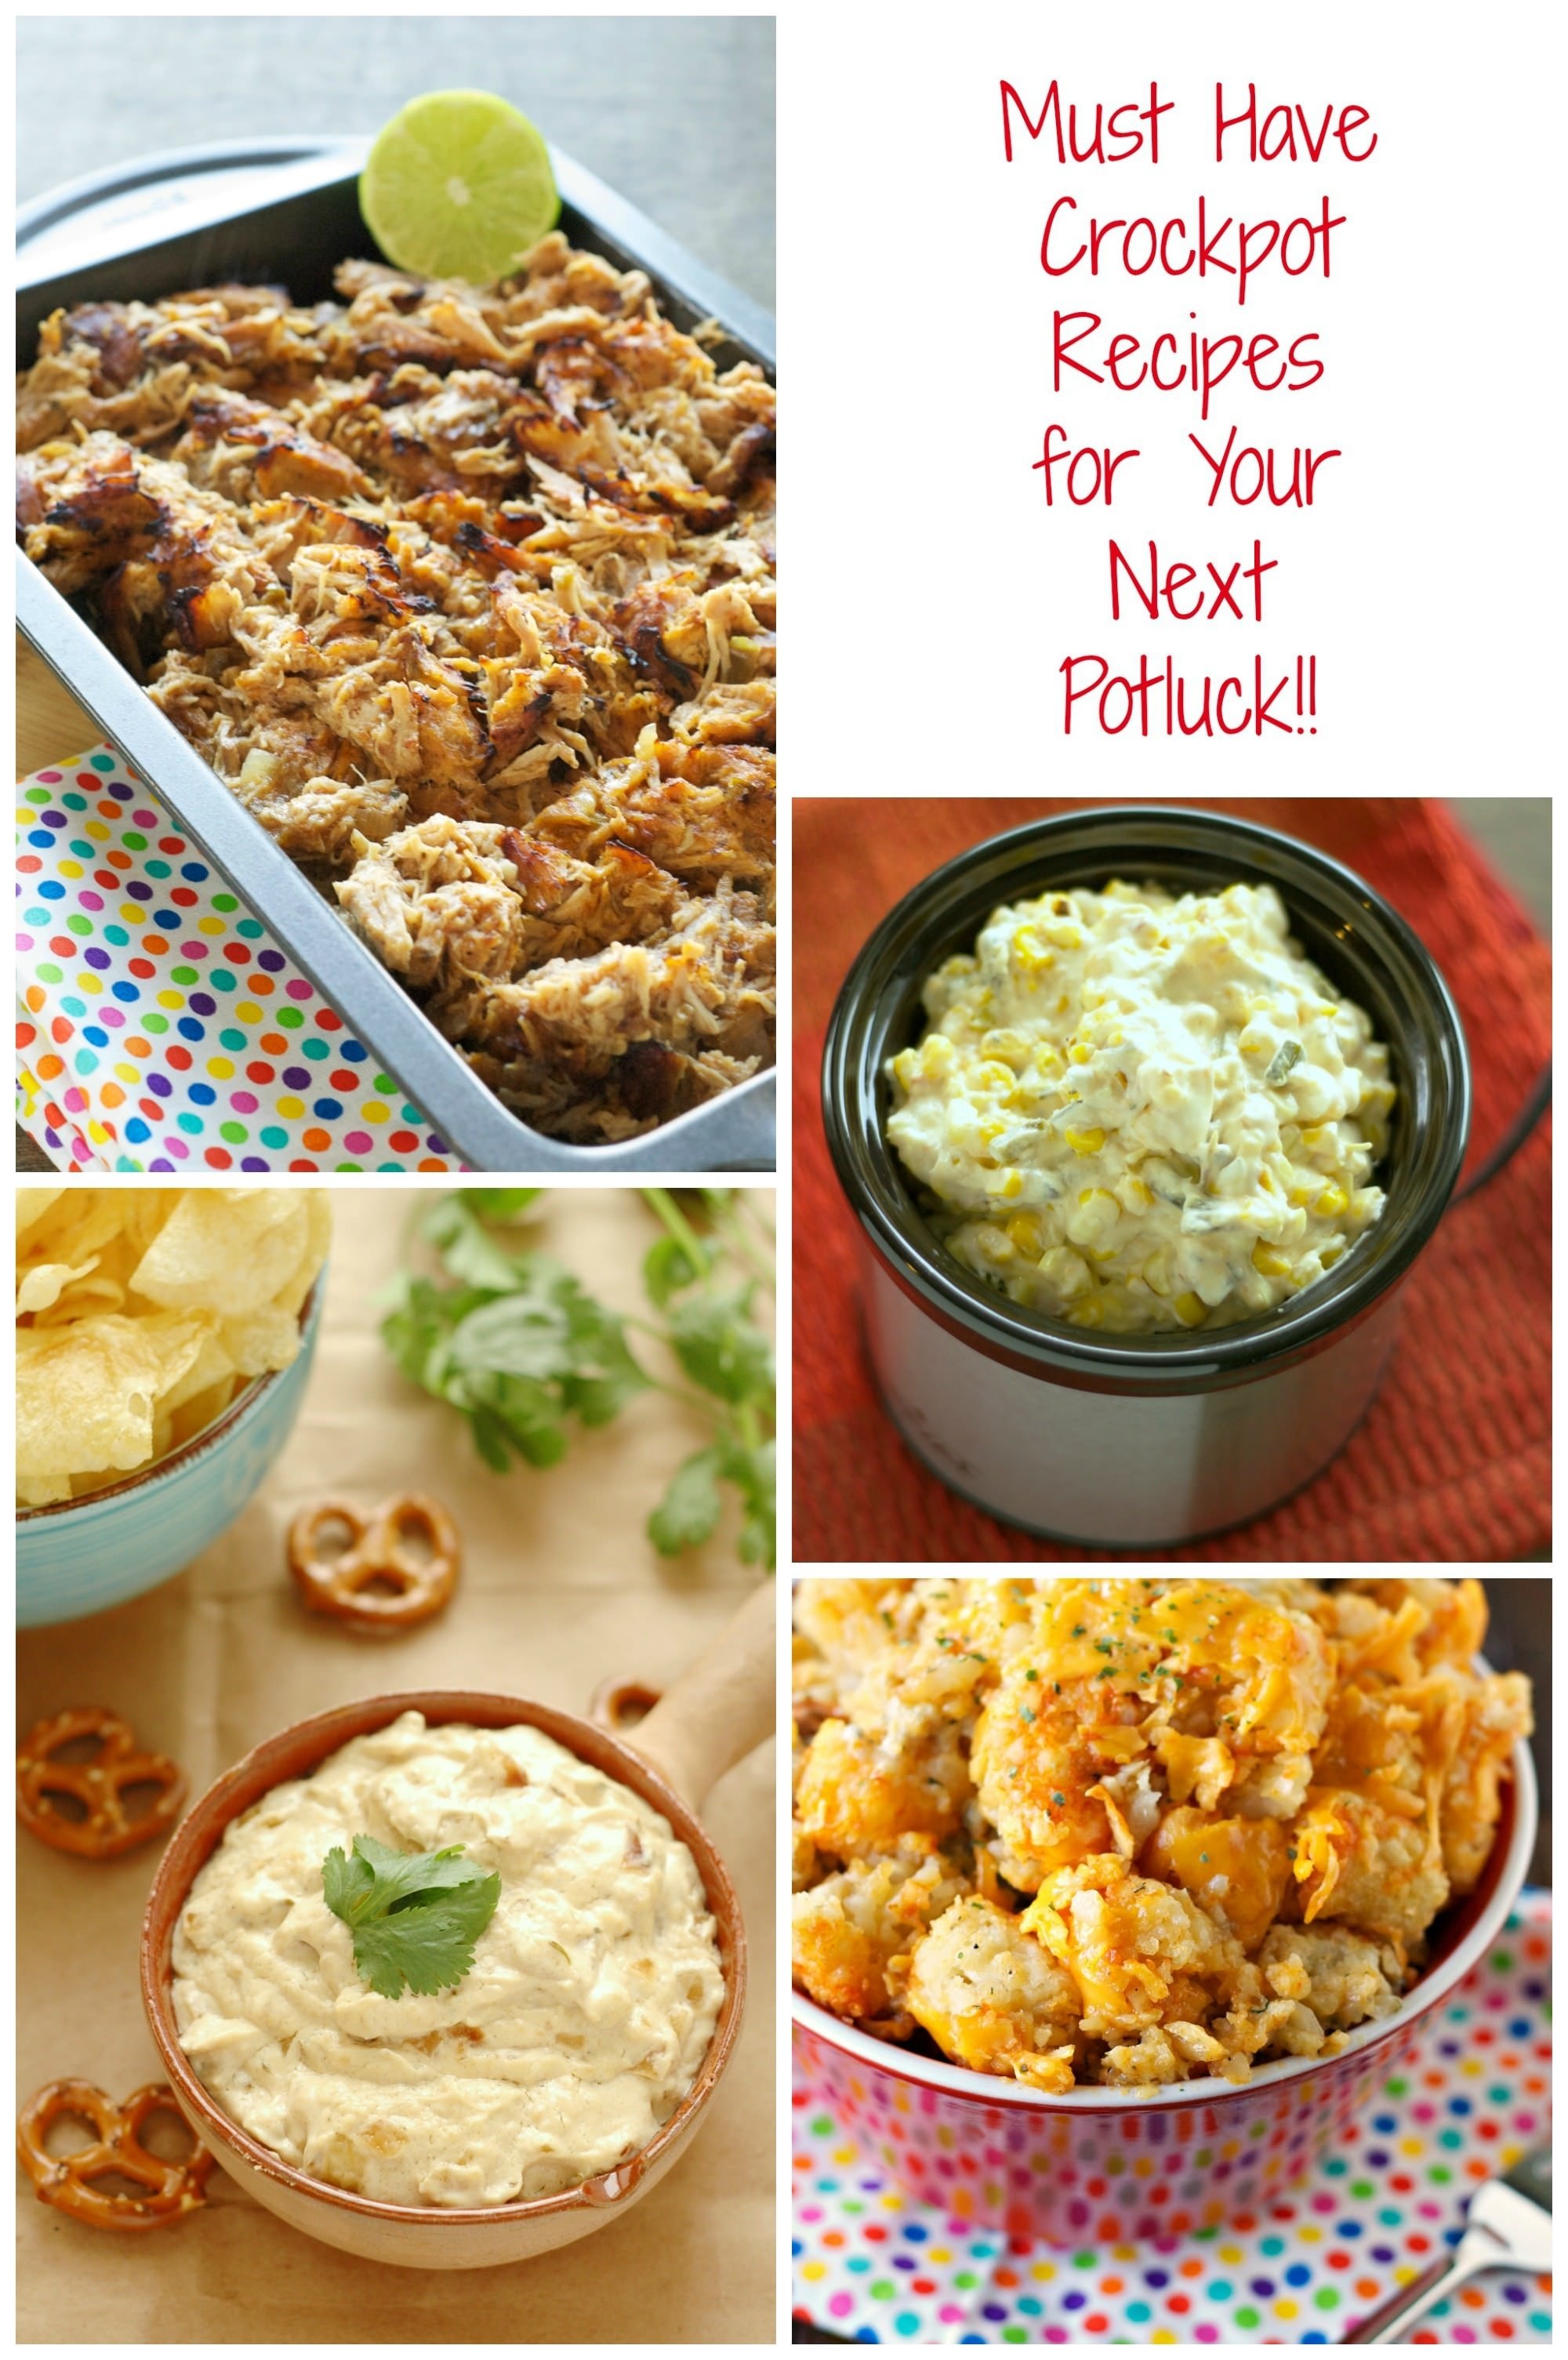 10 Wonderful Potluck Ideas For Work Lunch delicious slow cooker dishes for your next potluck slow cooker 2 2022